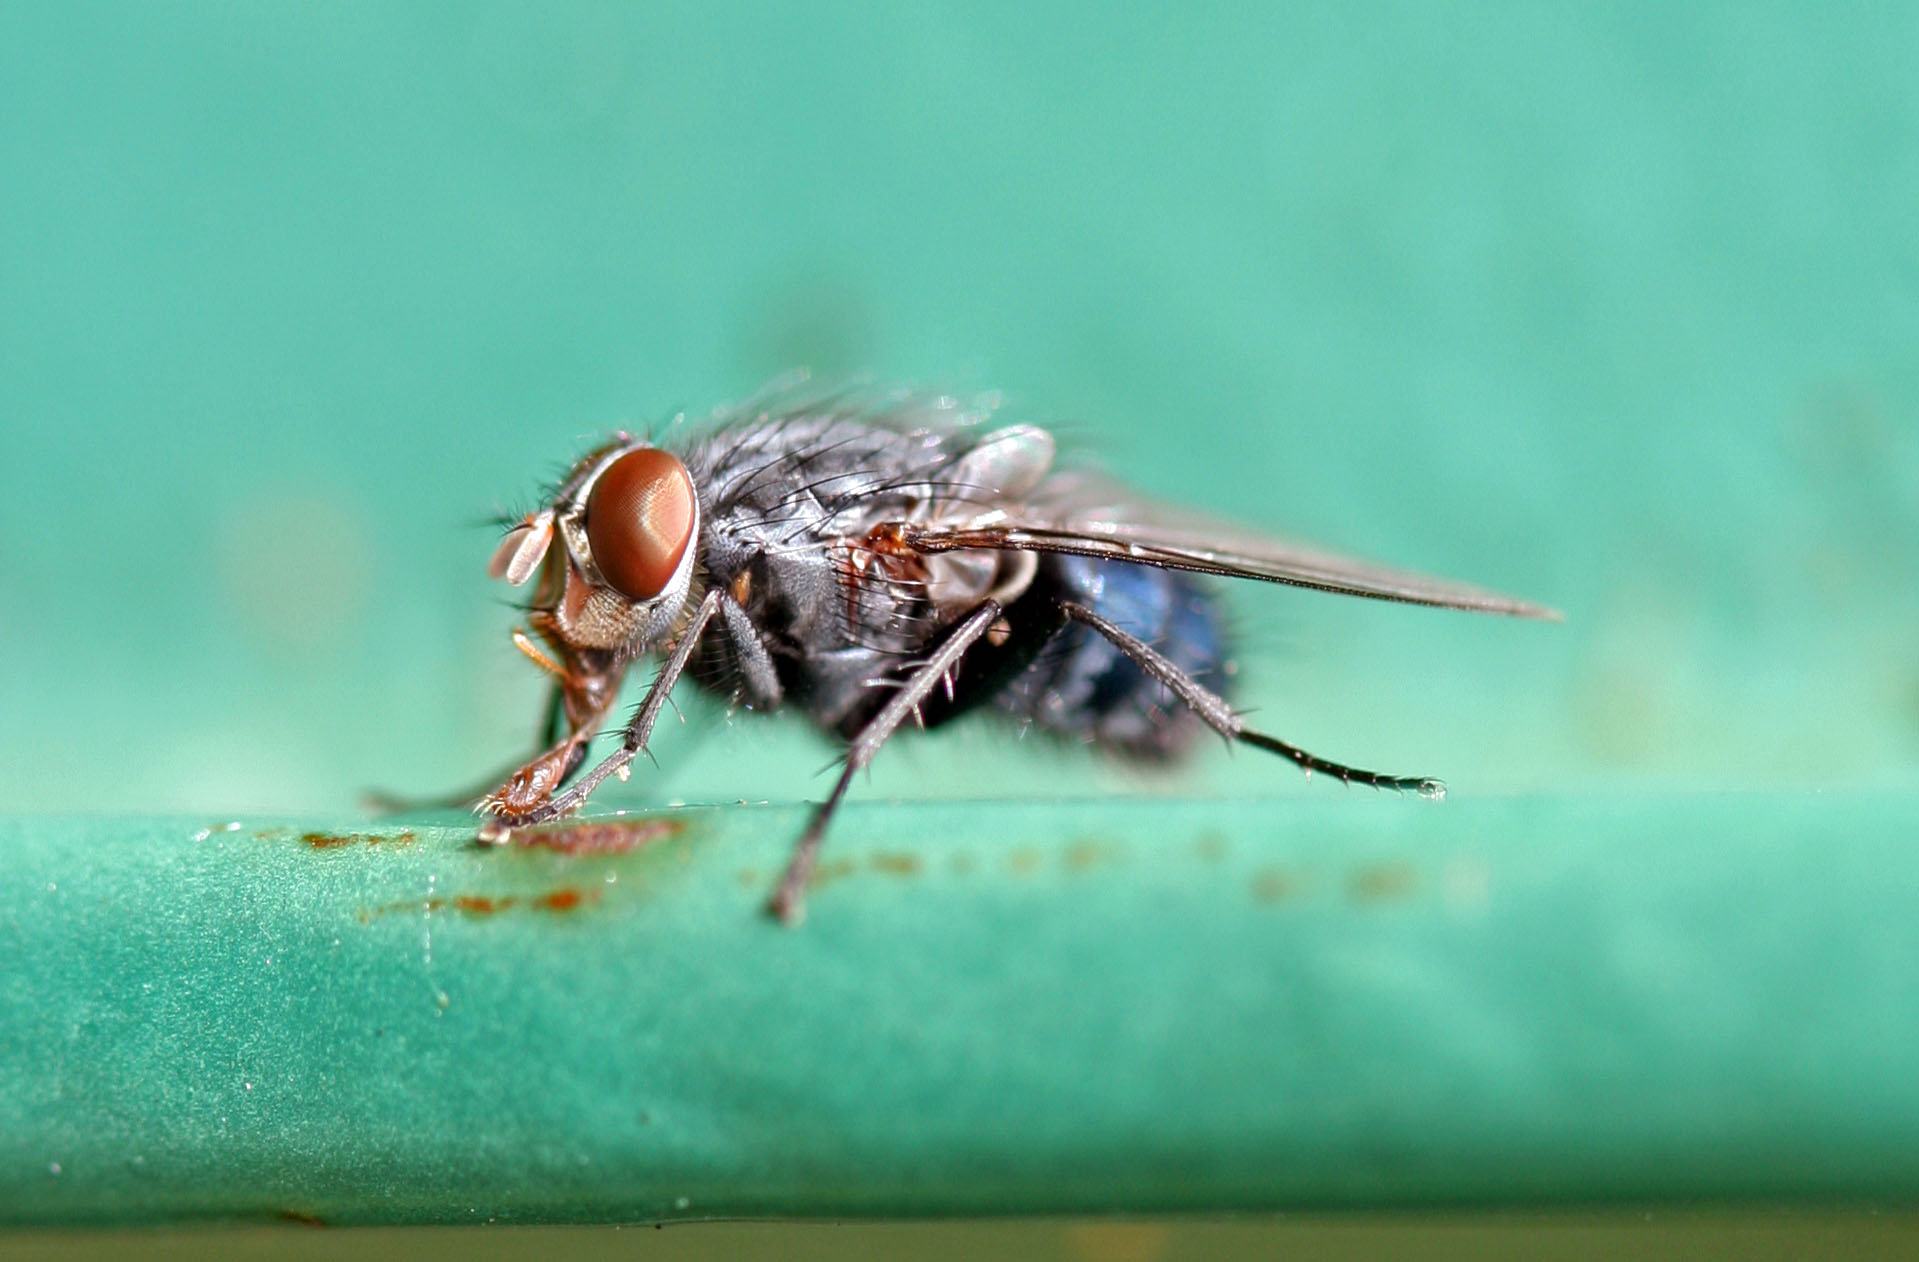 Premature Blowfly Egg Development Leads To Inaccurate Time Since Death Estimations ForensicBites